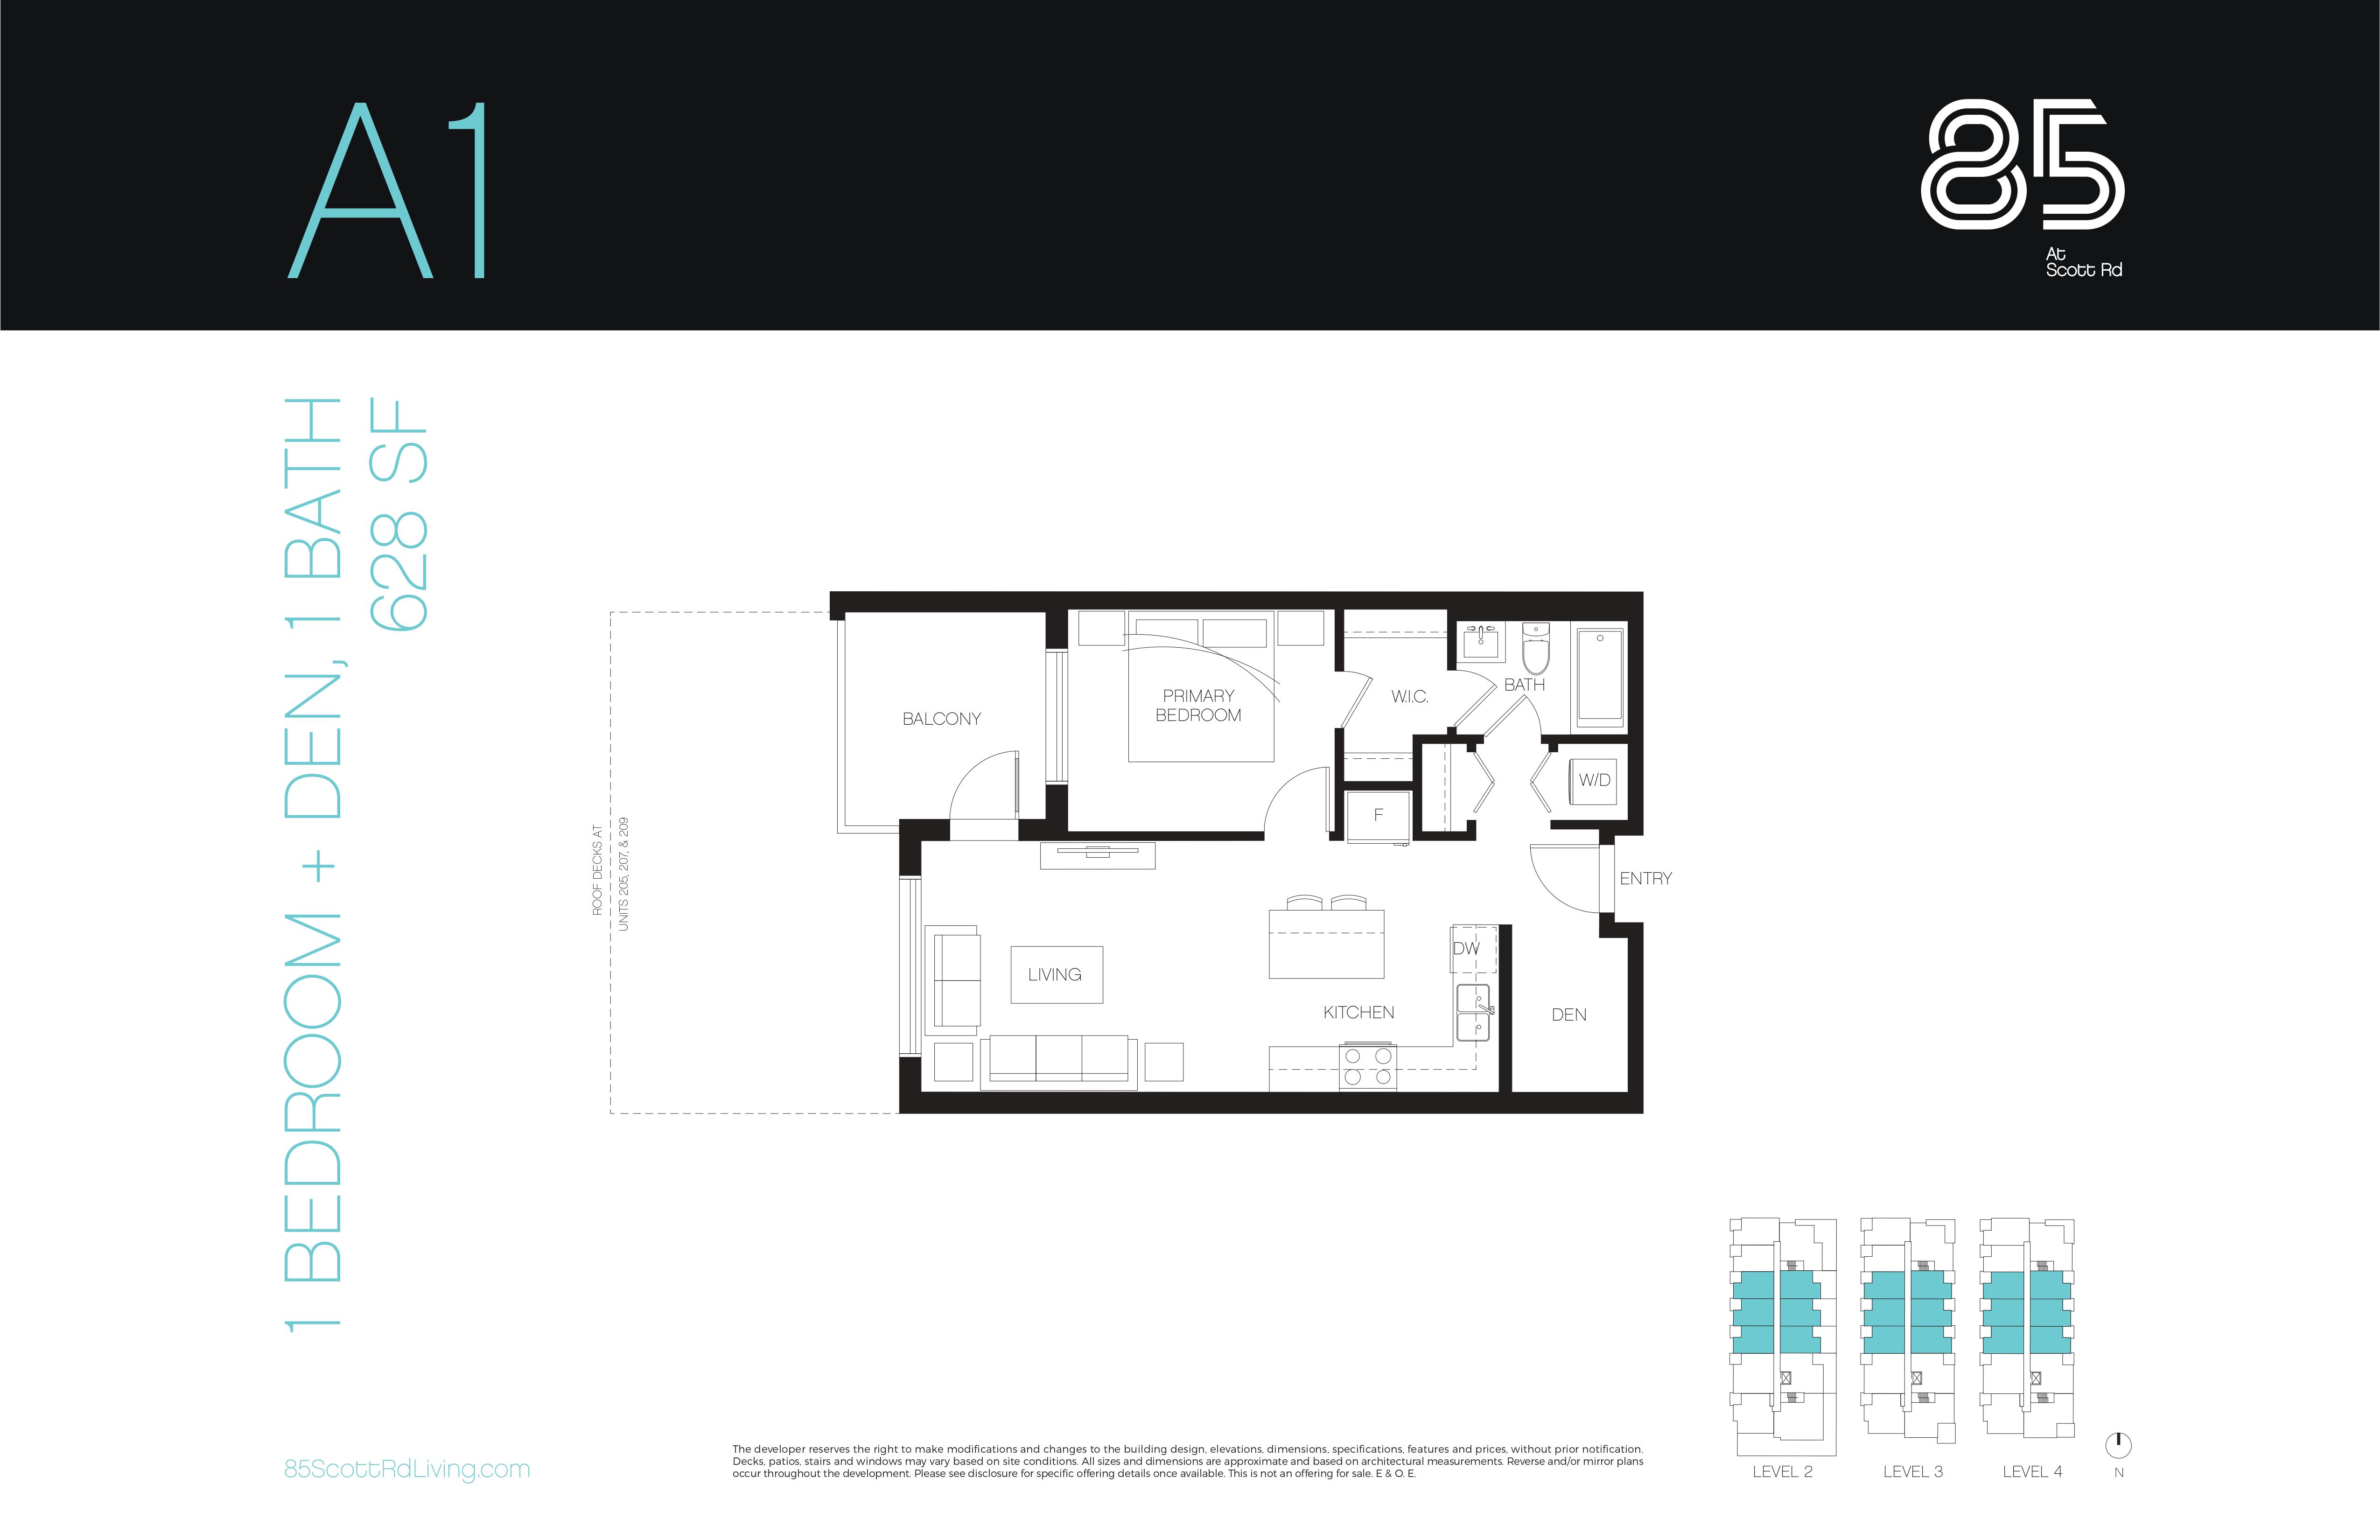 A1 Floor Plan of The 85 Condos with undefined beds